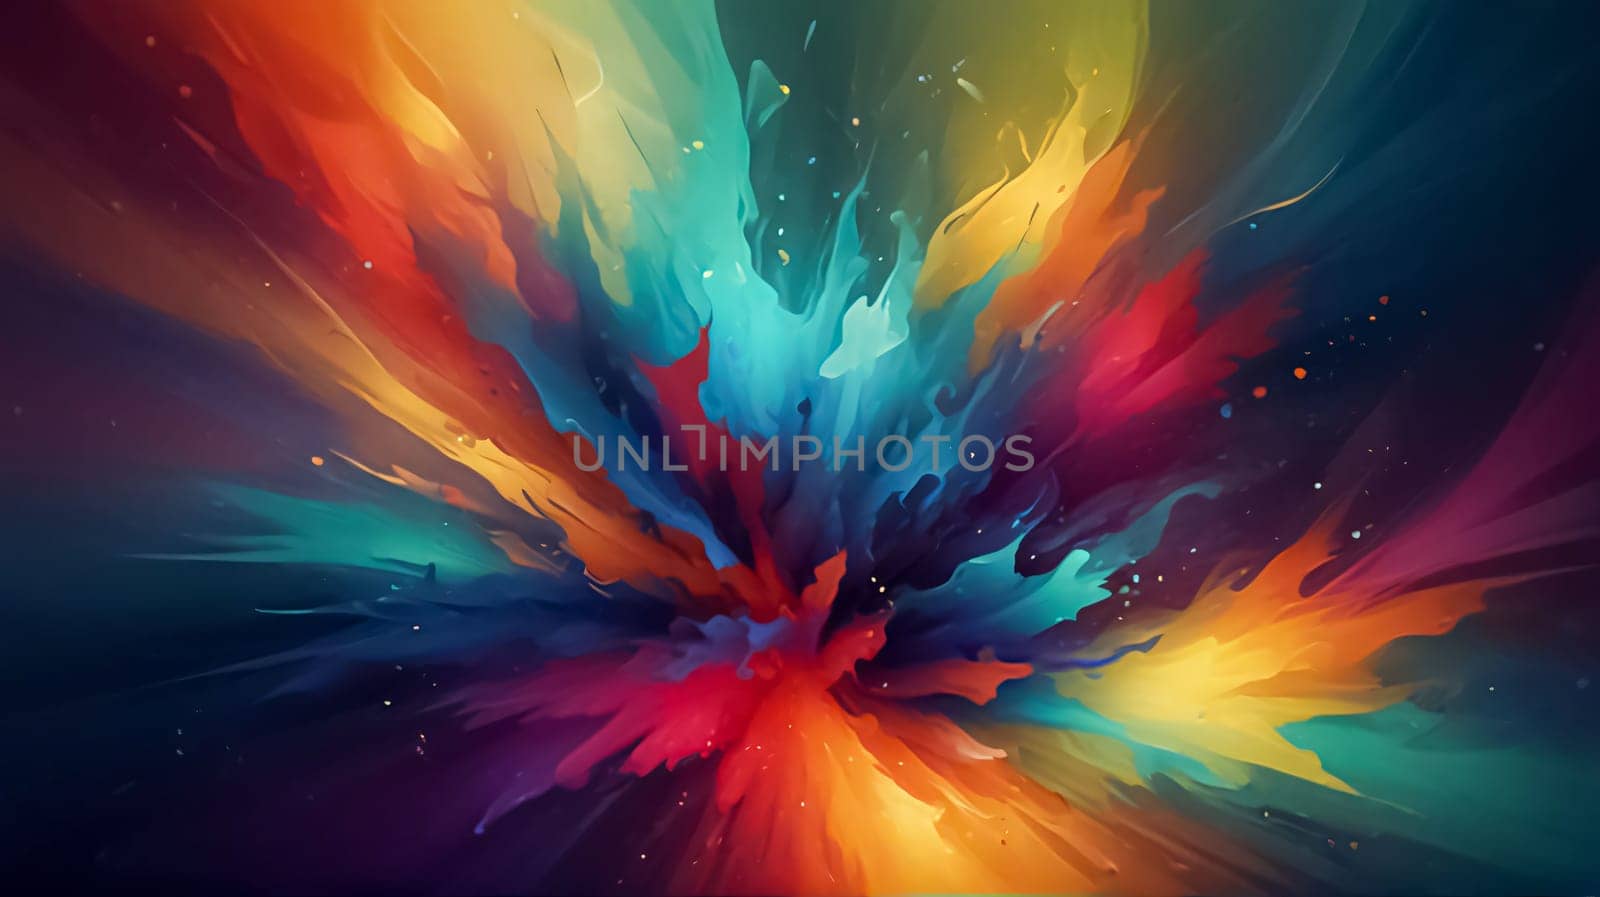 abstract multicolor and multiple lines and curve with spectrum background, bright red, orange, blue, yellow, green neon rays and colorful glowing lines good for multimedia content creations